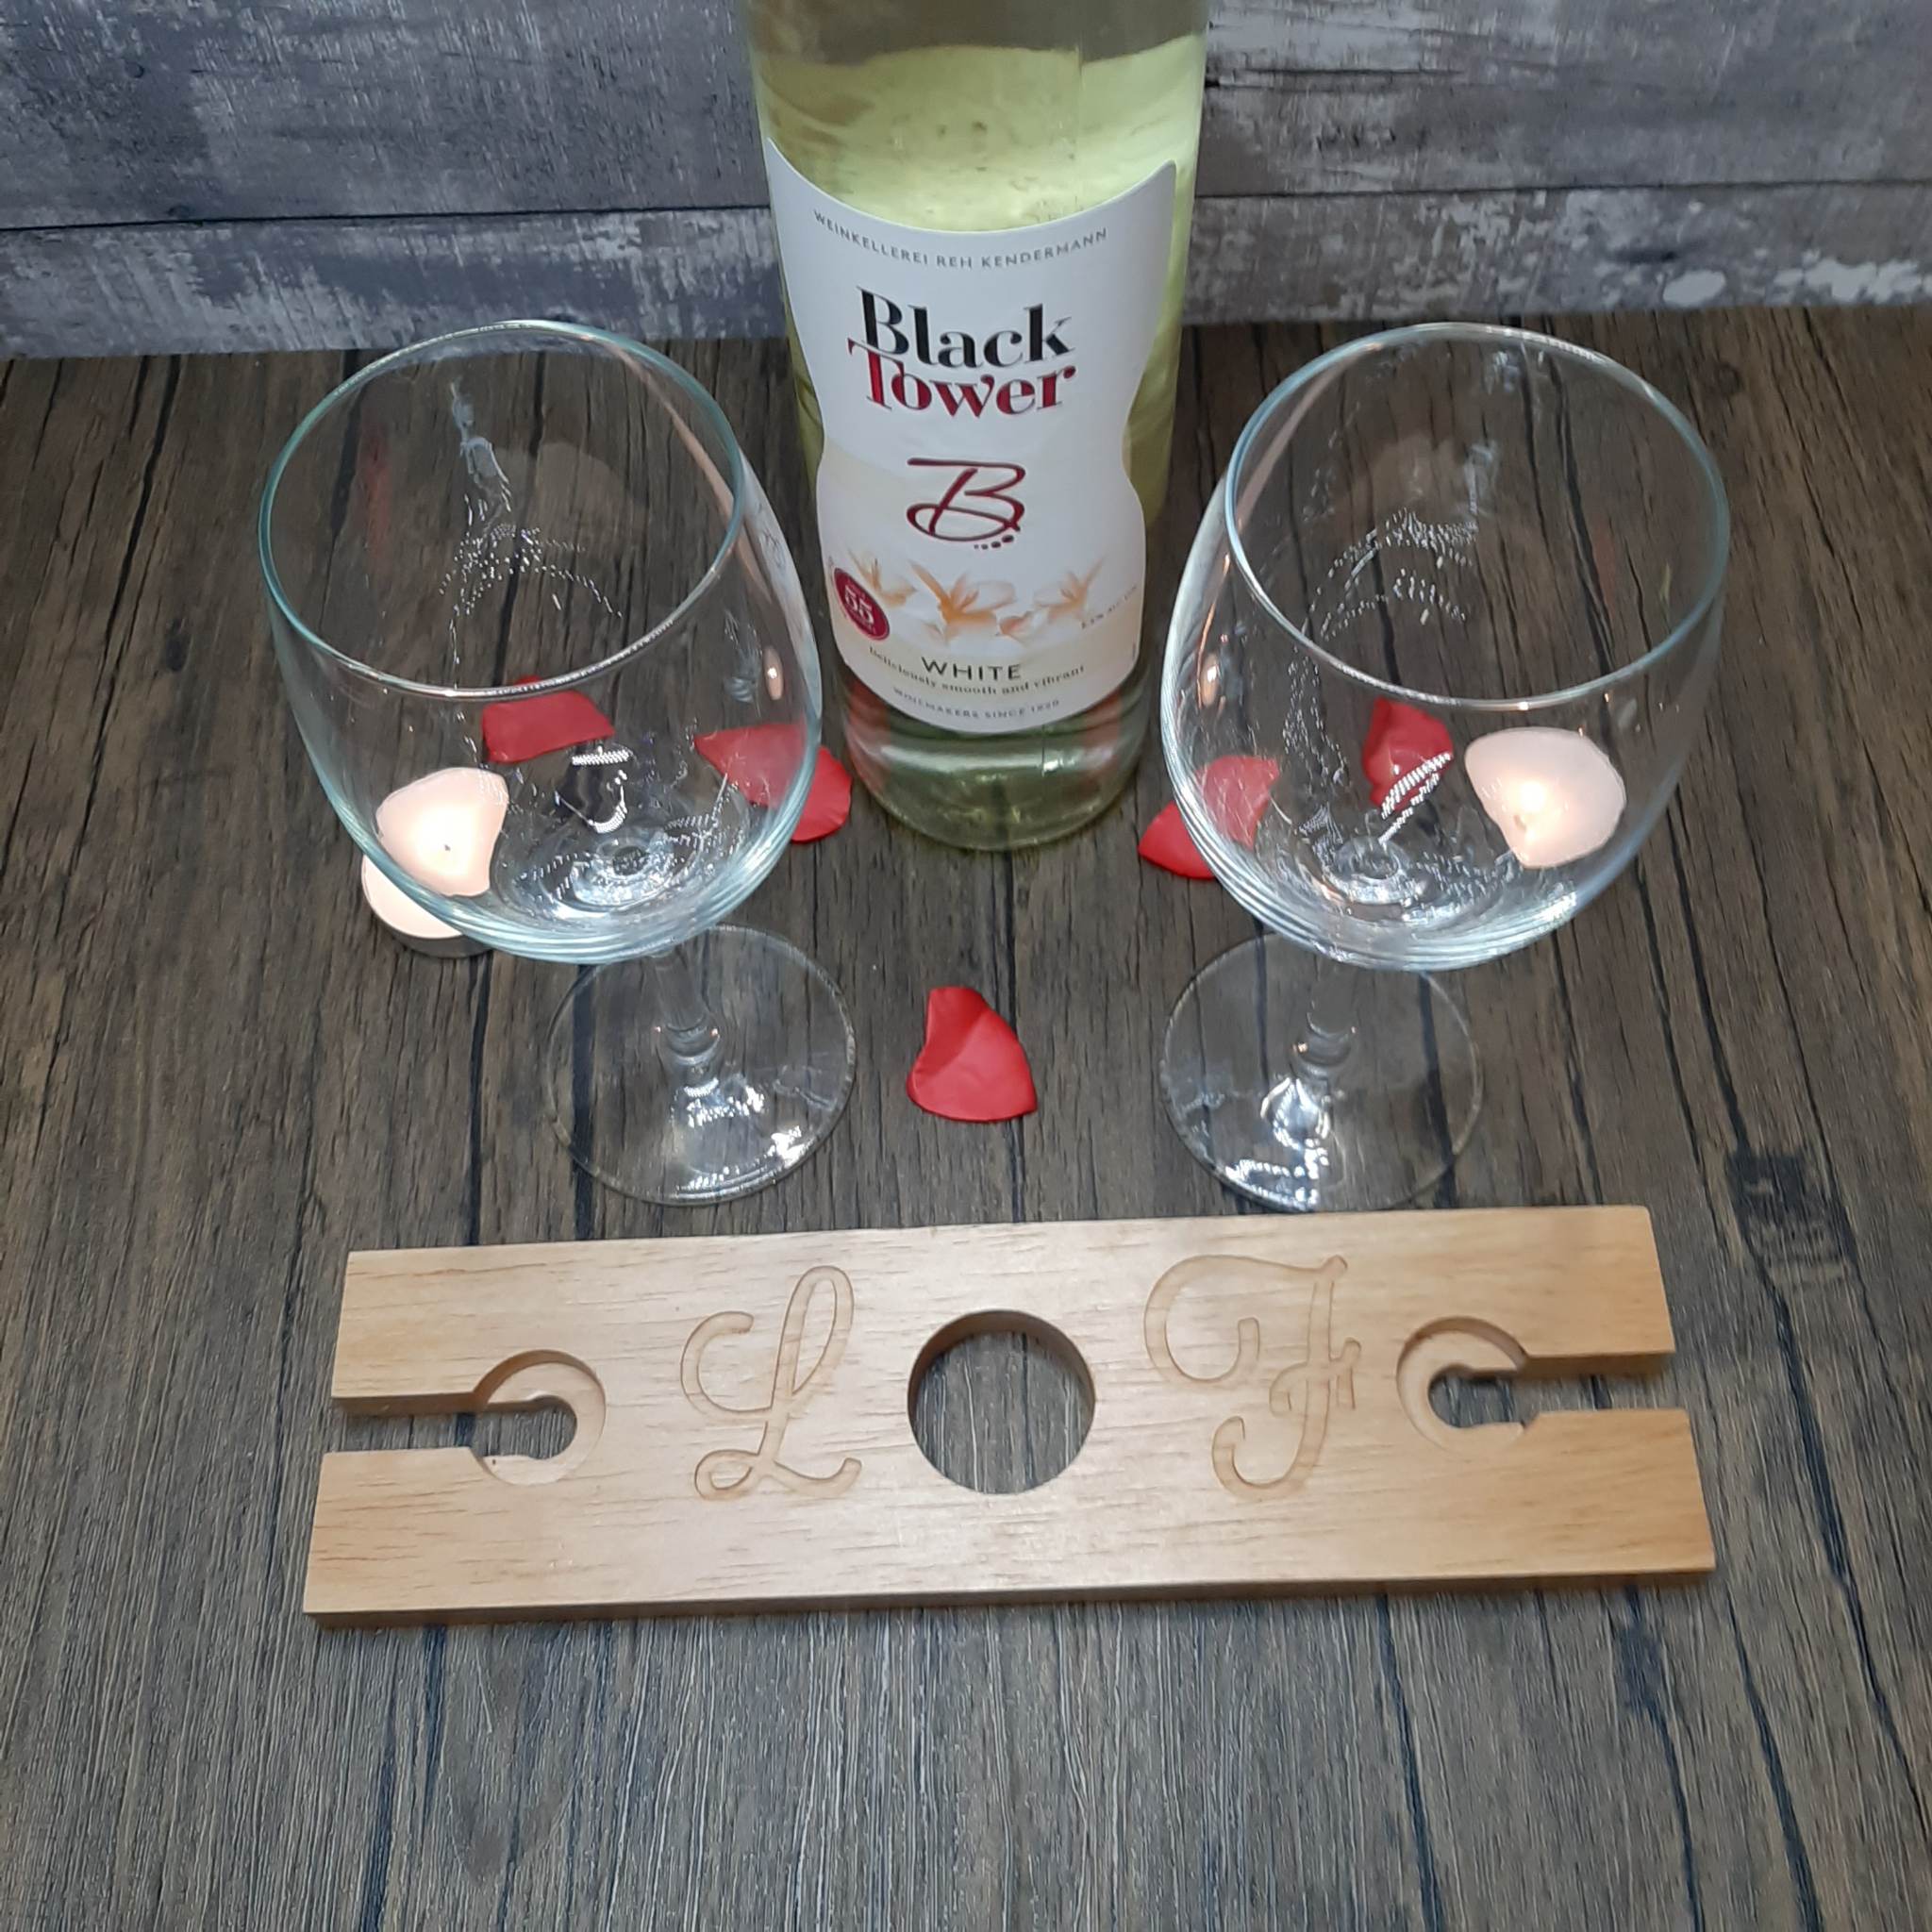 Wooden Wine GLass Holder great for anniversaries show cnc engraved initials laid out in front of glasses